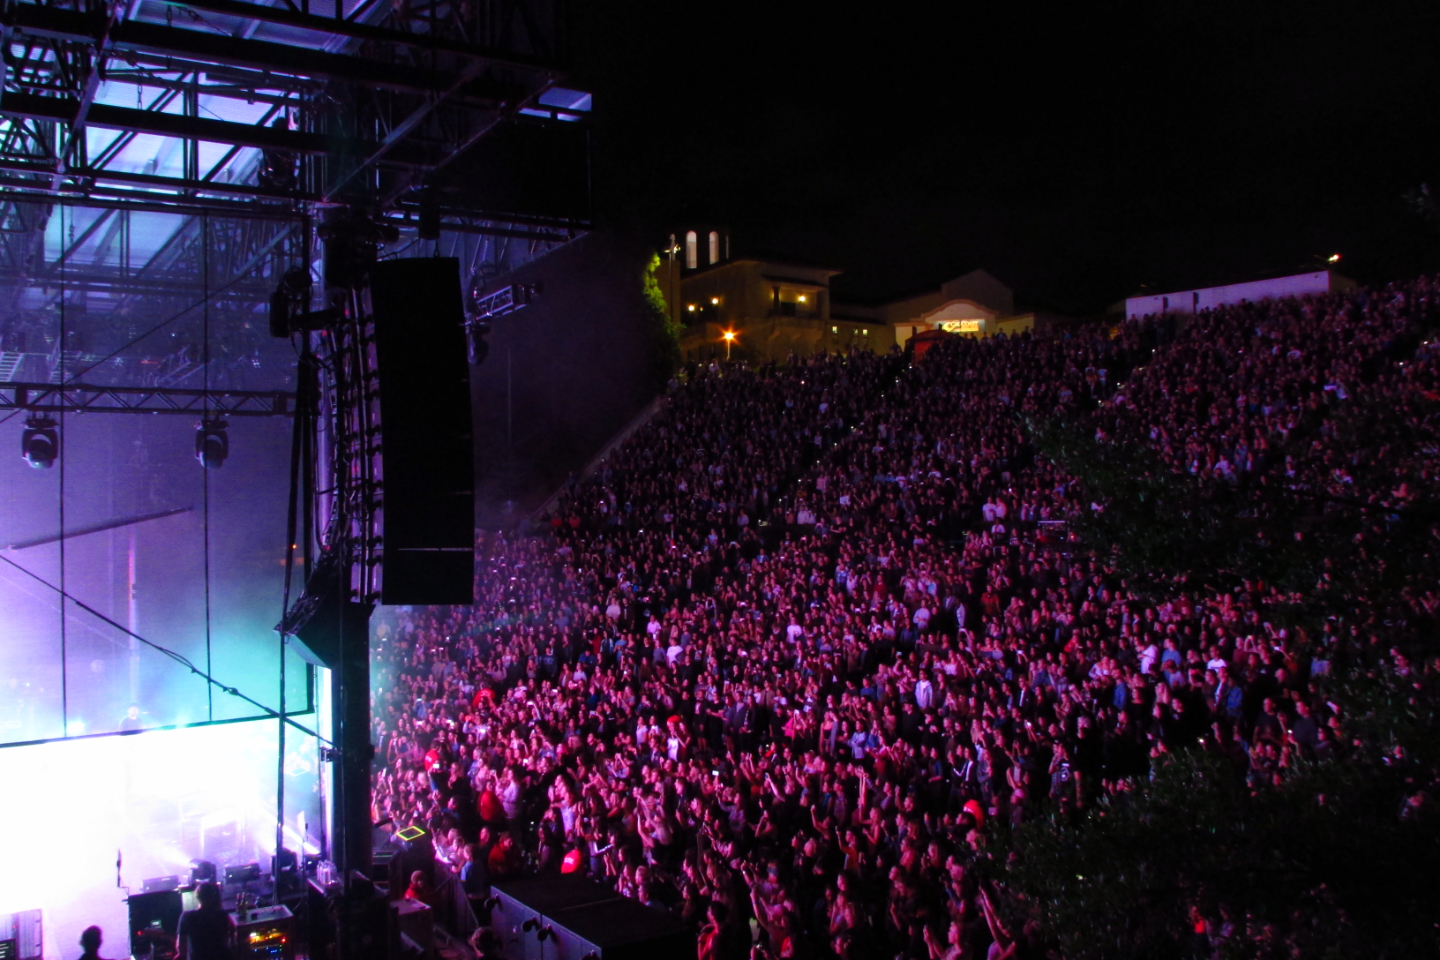 More than 4,000 fans packed the Cal Coast Credit Union Amphitheater at San Diego State University to watch The 1975 perform on Oct. 15, 2016. Photo courtesy of Nick Ng.